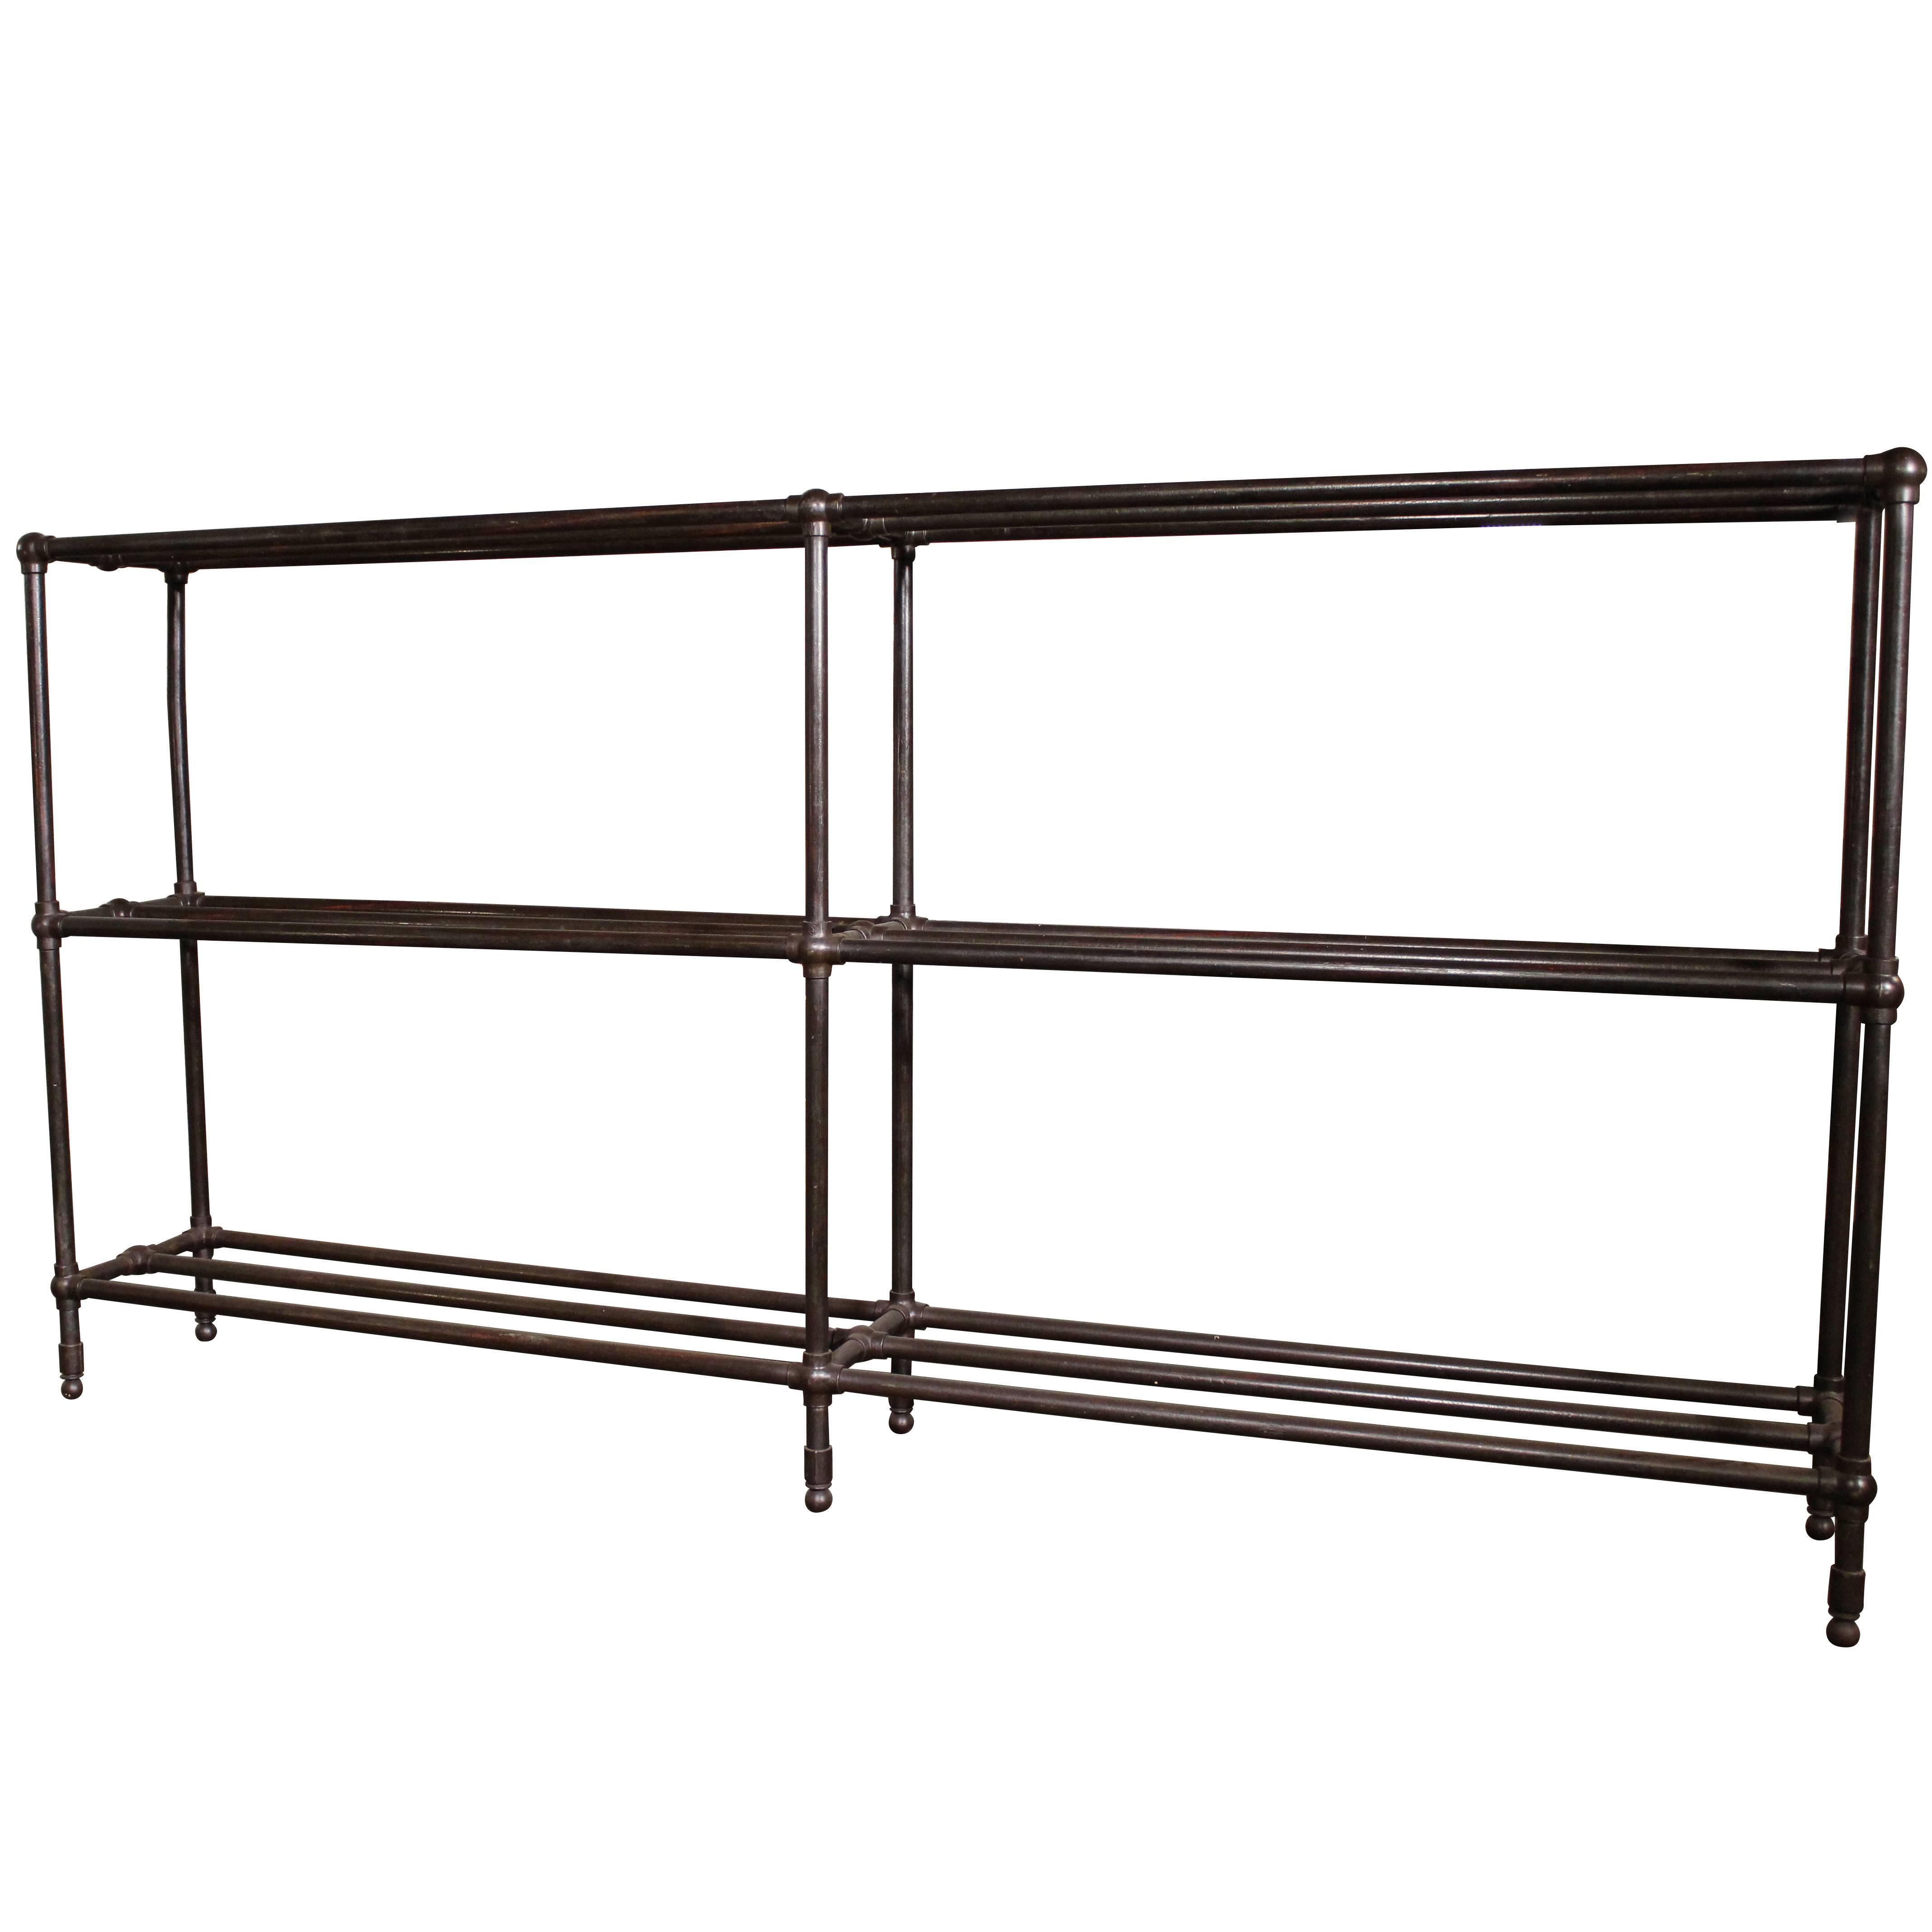 Vintage Industrial Ball Joint Pipe Shelving Storage Unit Rack Bookcase